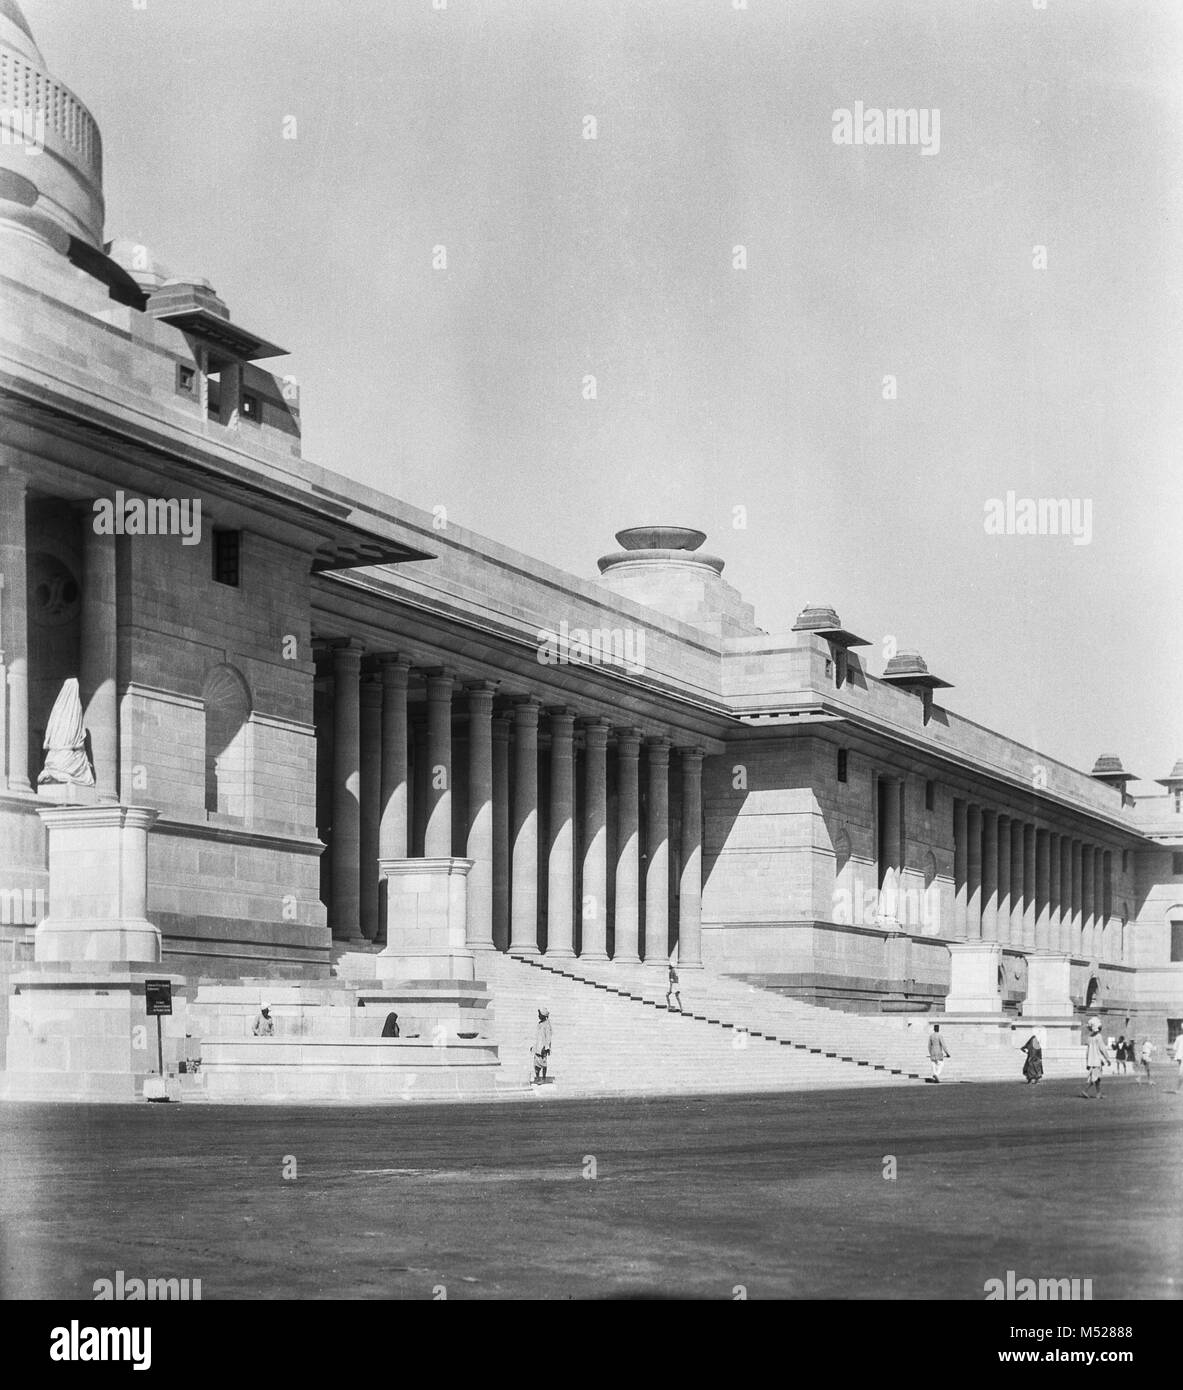 The construction of Rashtrapati Bhavan  photo taken by A. G. Shoosmith, Edwin Lutyens's representative in New Delhi, where he worked from 1920-1931.Shoosmith went out to India in 1920 to be Edwin Lutyens’ permanent representative in New Delhi. When the new capital was rising, Lutyens and Herbert Baker only went out for a couple of months each winter while the permanent representative was on the spot all year round, and Shoosmith’s job was to supervise the construction of Viceroy’s House Stock Photo